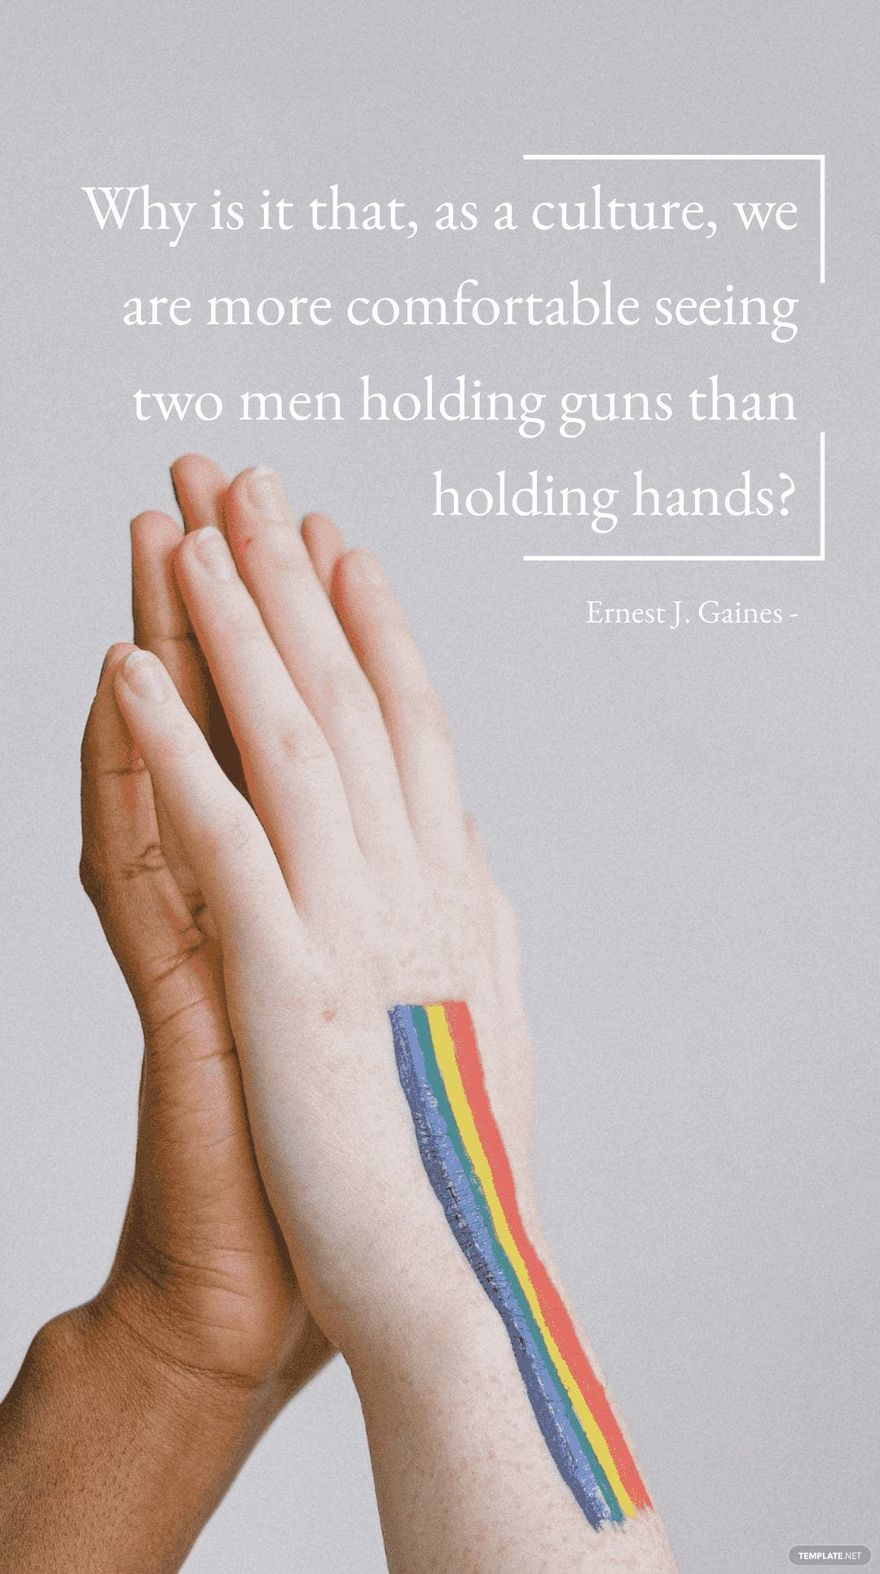 Ernest J. Gaines - Why is it that, as a culture, we are more comfortable seeing two men holding guns than holding hands? in JPG